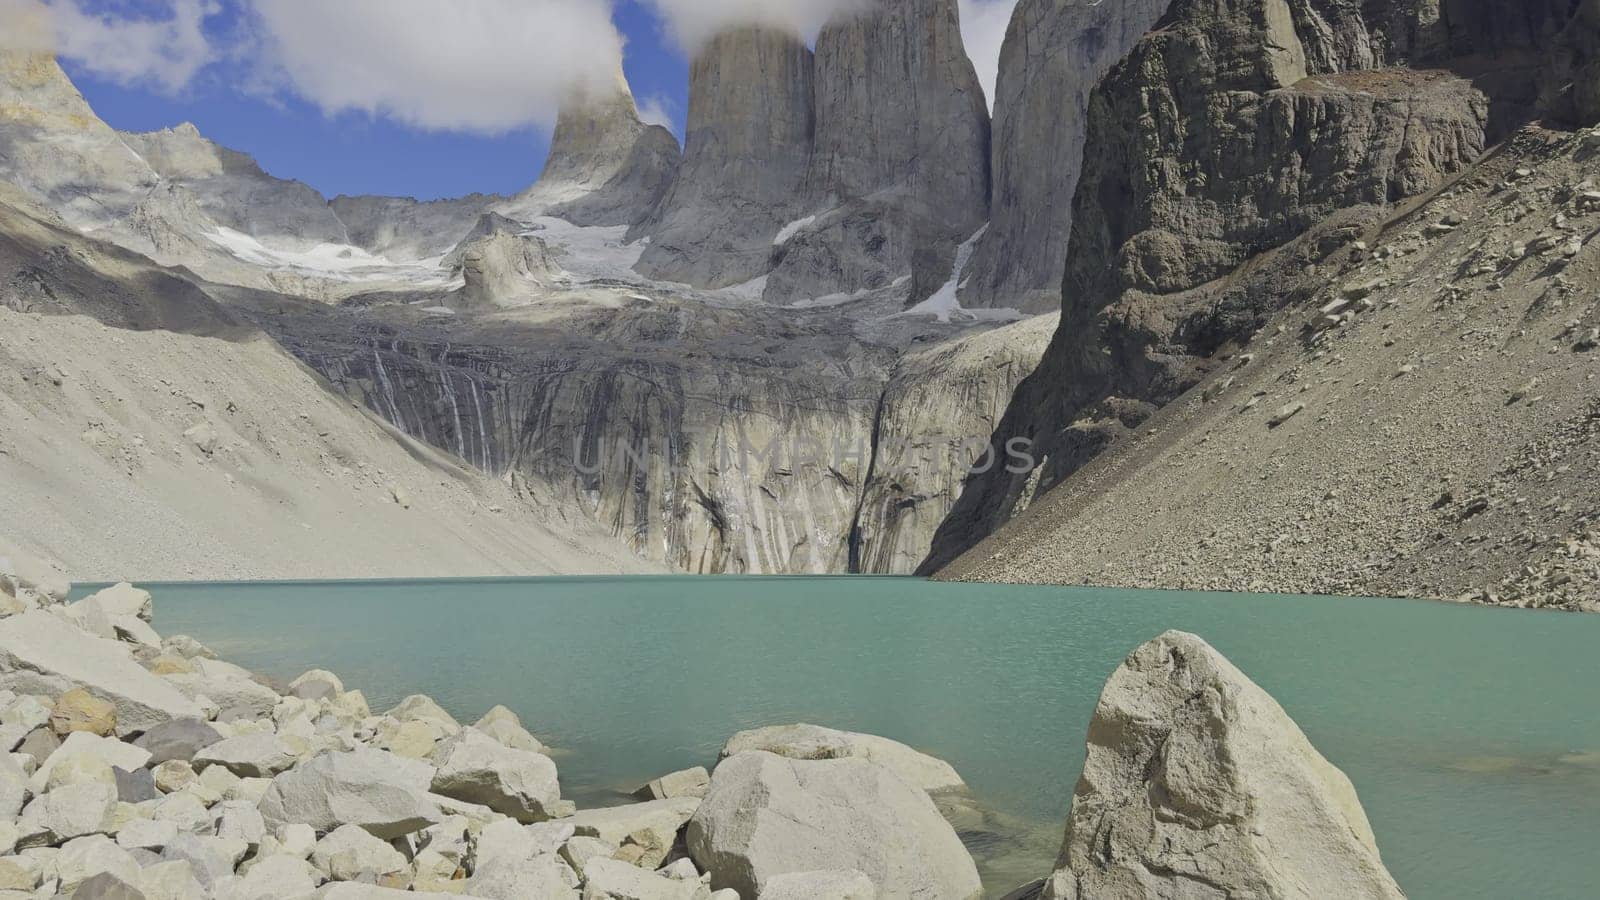 Stunning timelapse shows vibrant turquoise lake at Torres del Paine's base.